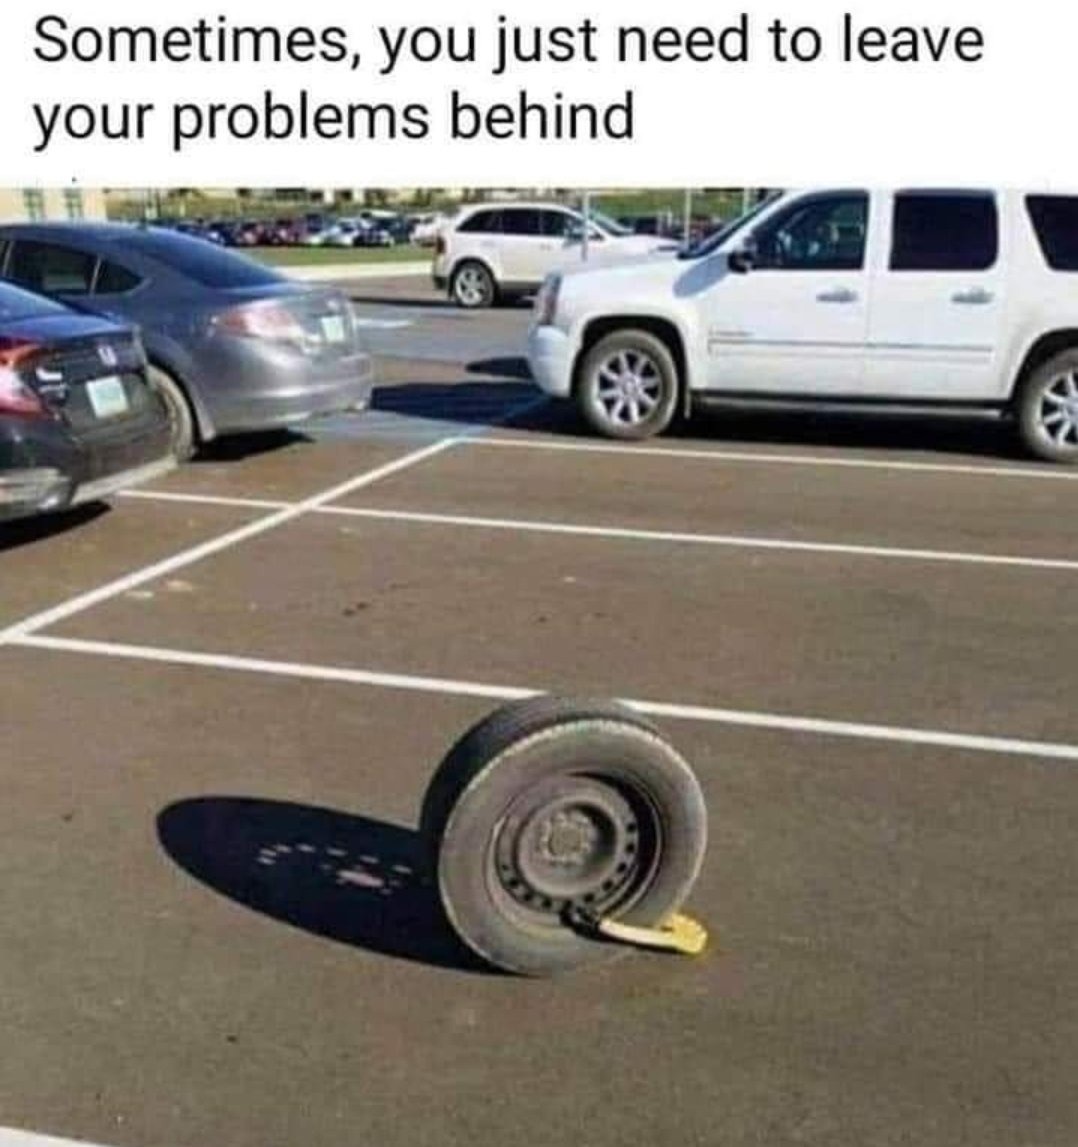 Leave your problems behind - meme